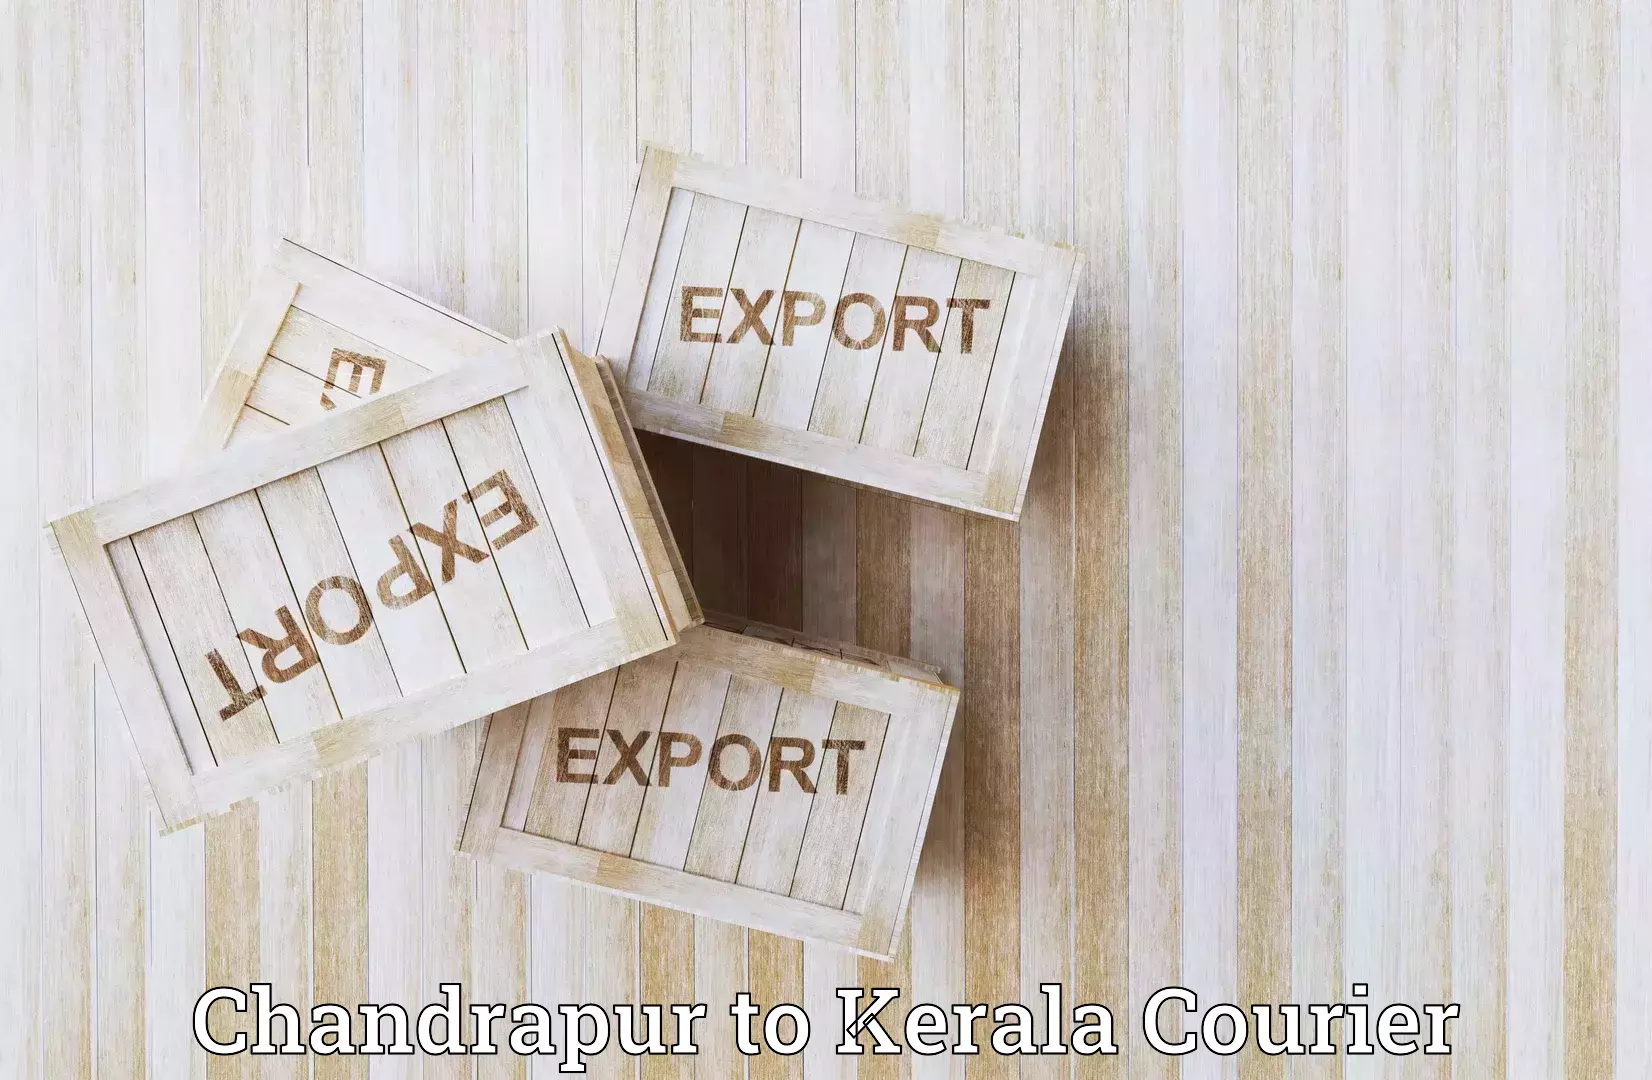 Global shipping networks in Chandrapur to Peravoor